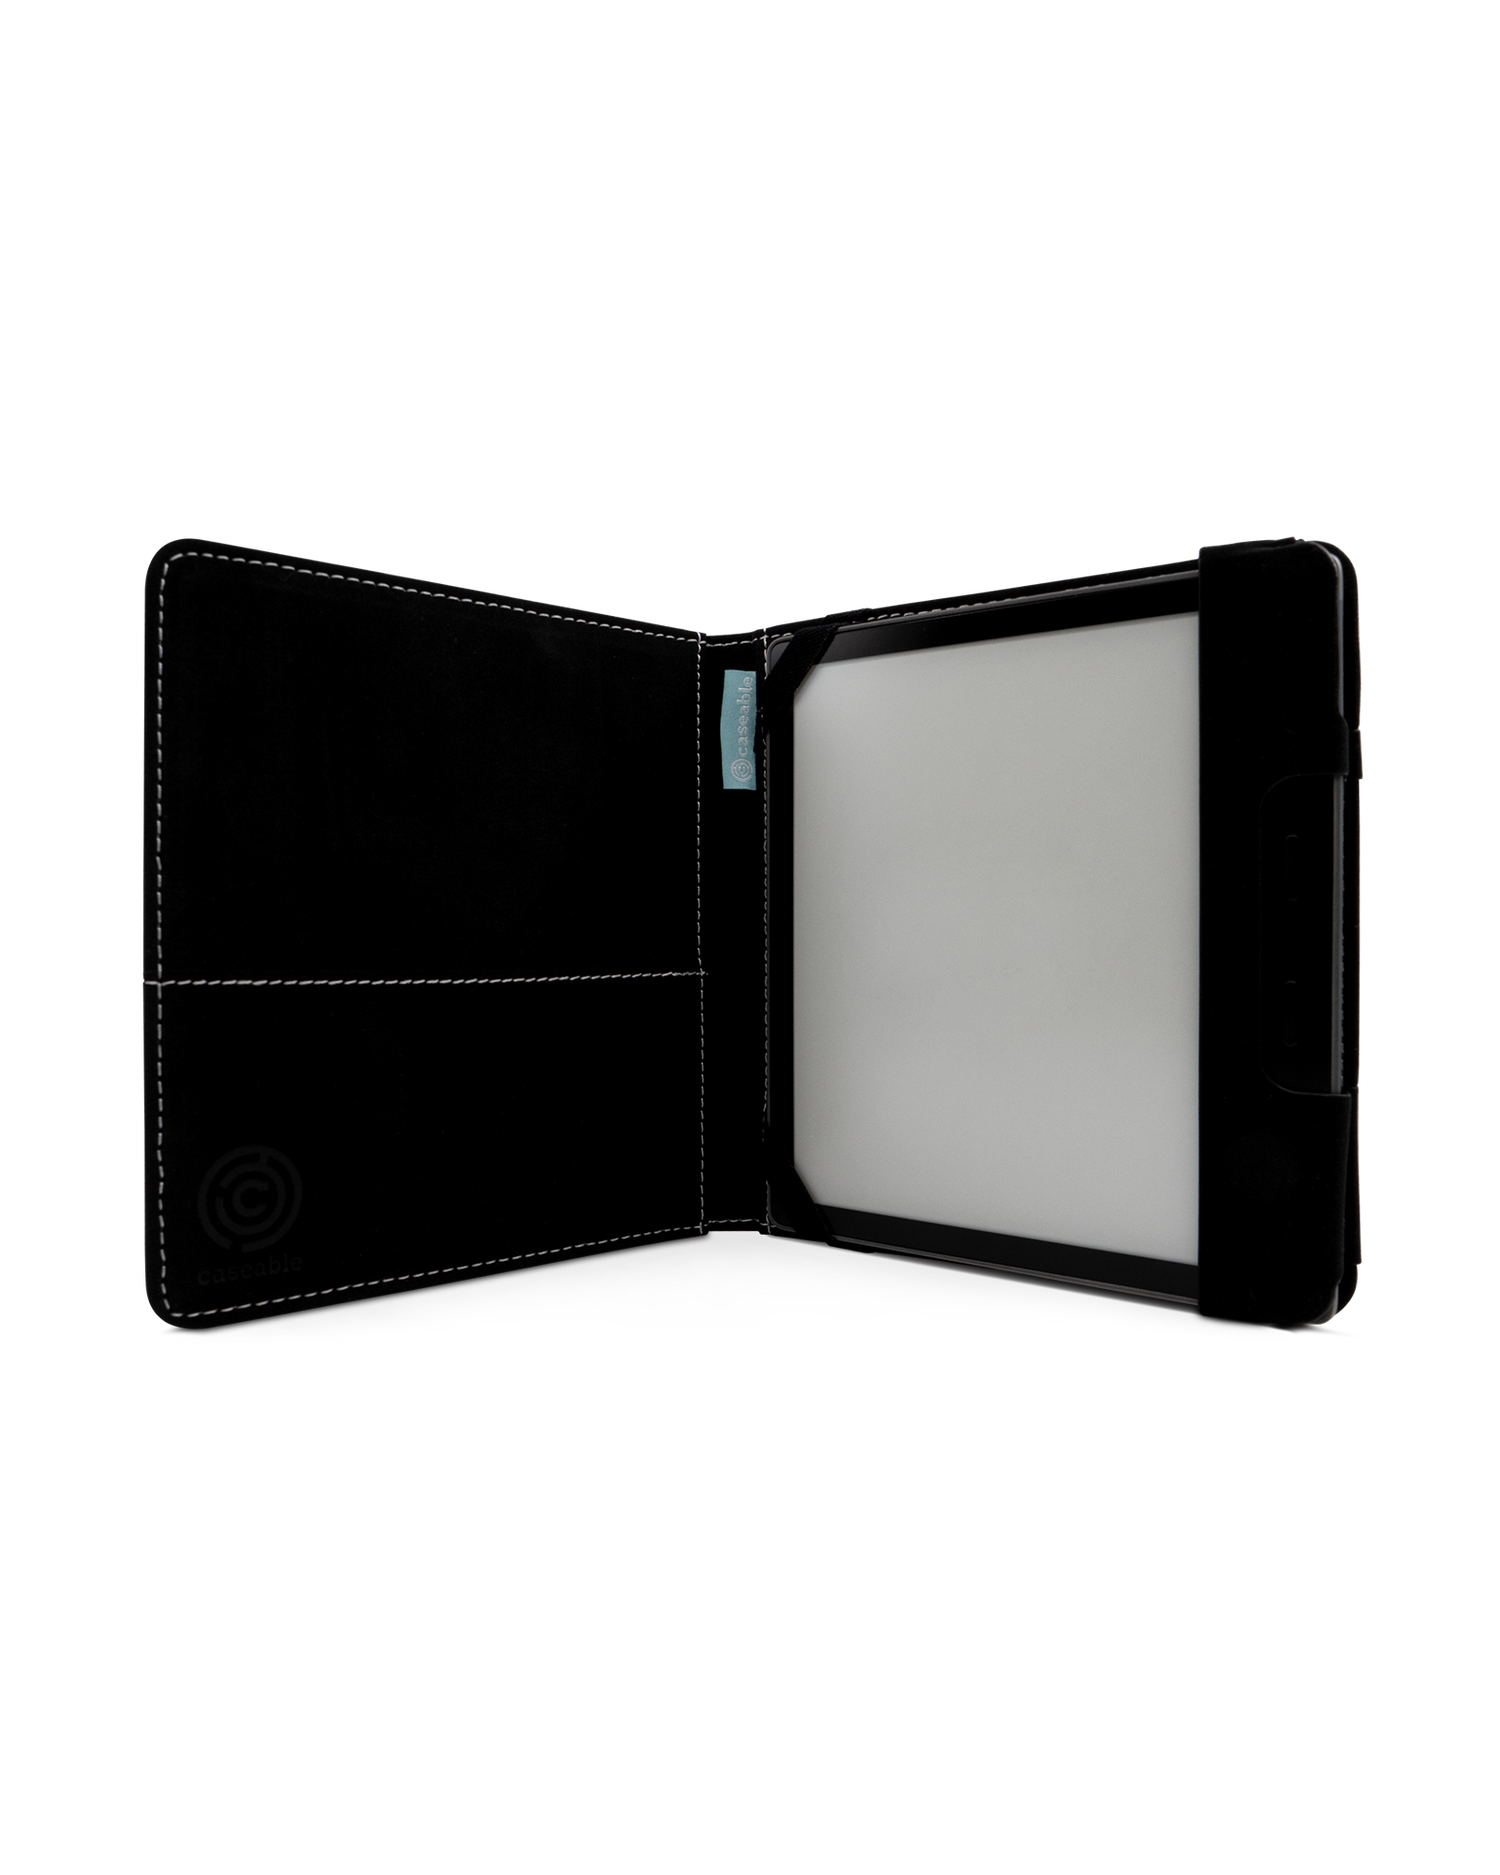 Forest eReader Case for tolino vision 6: Opened interior view